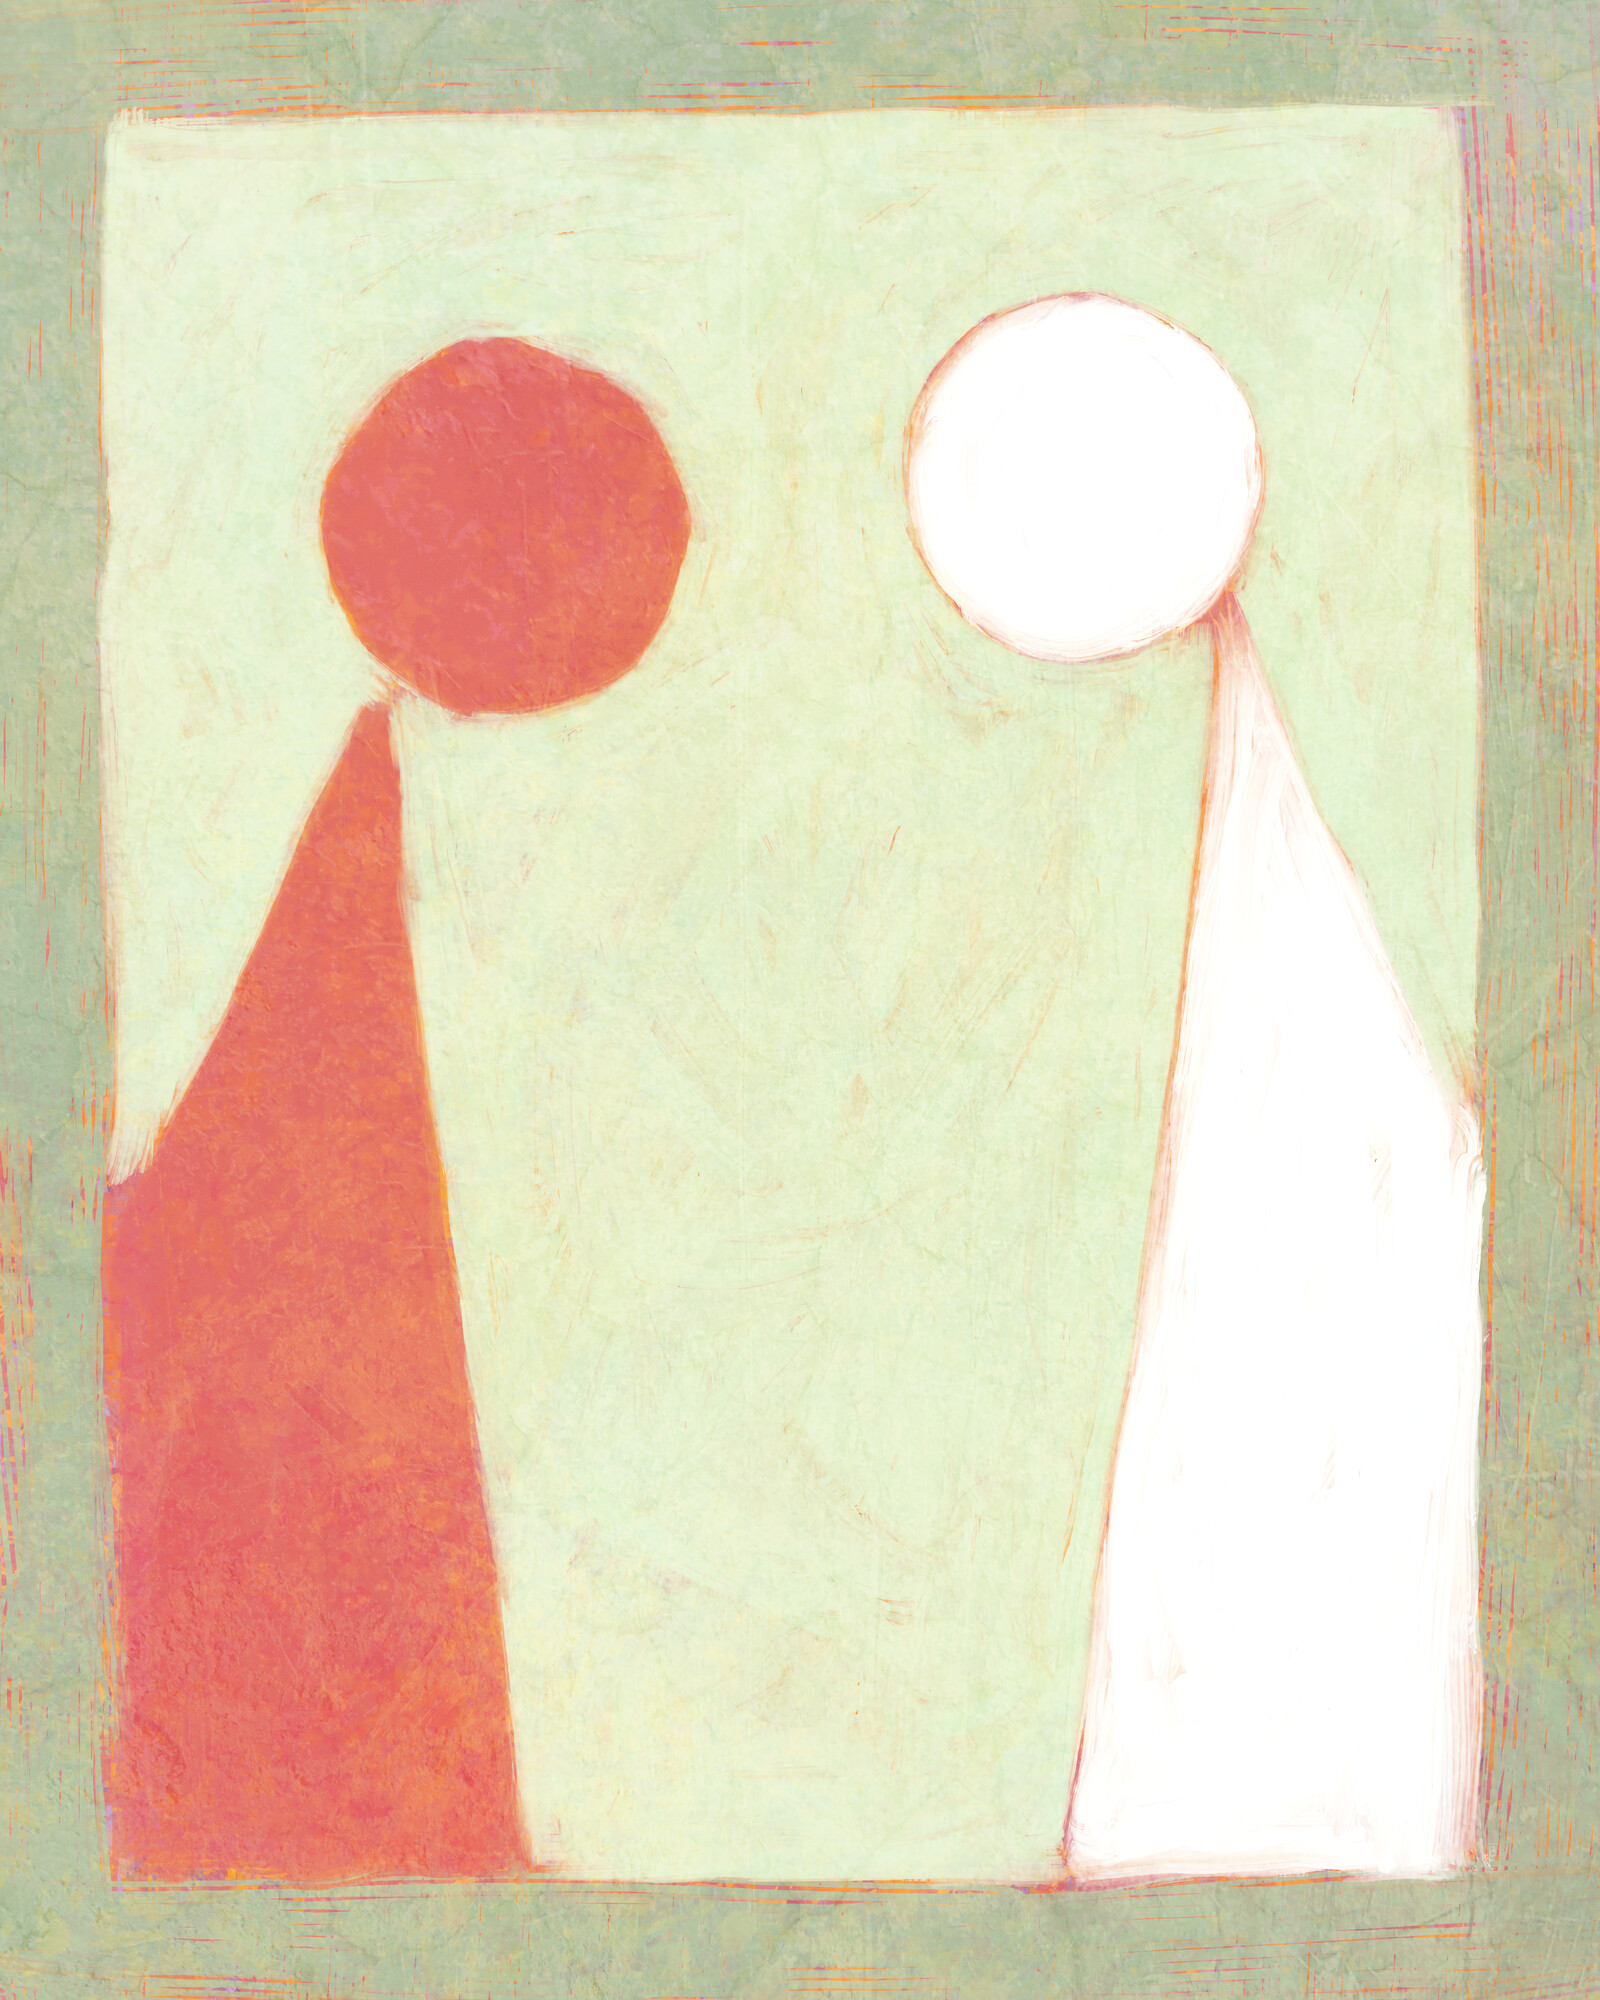 A red circle-and-triangle figure at left; a white circle-and-triangle figure at right.